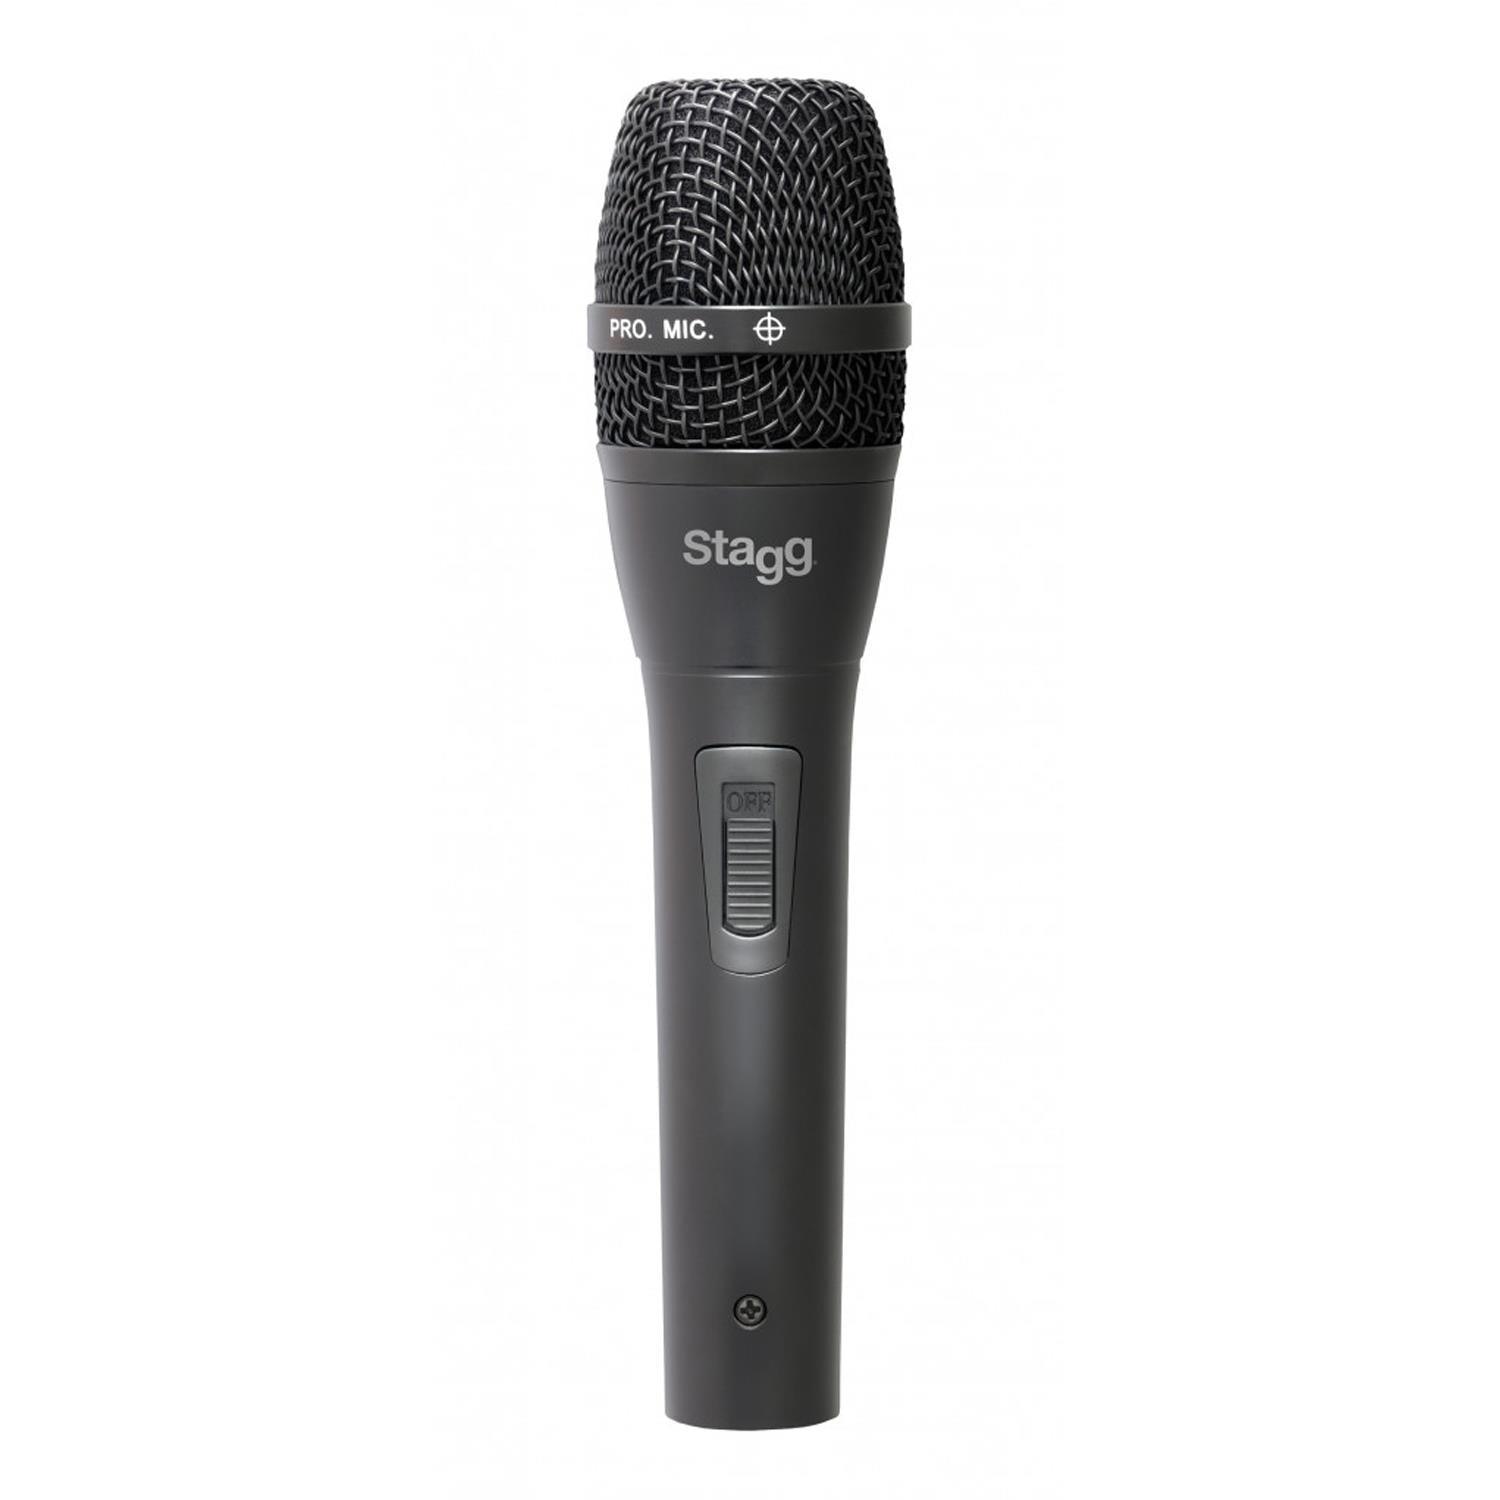 Stagg SDM80 Dynamic Vocal and Instrument Microphone - DY Pro Audio